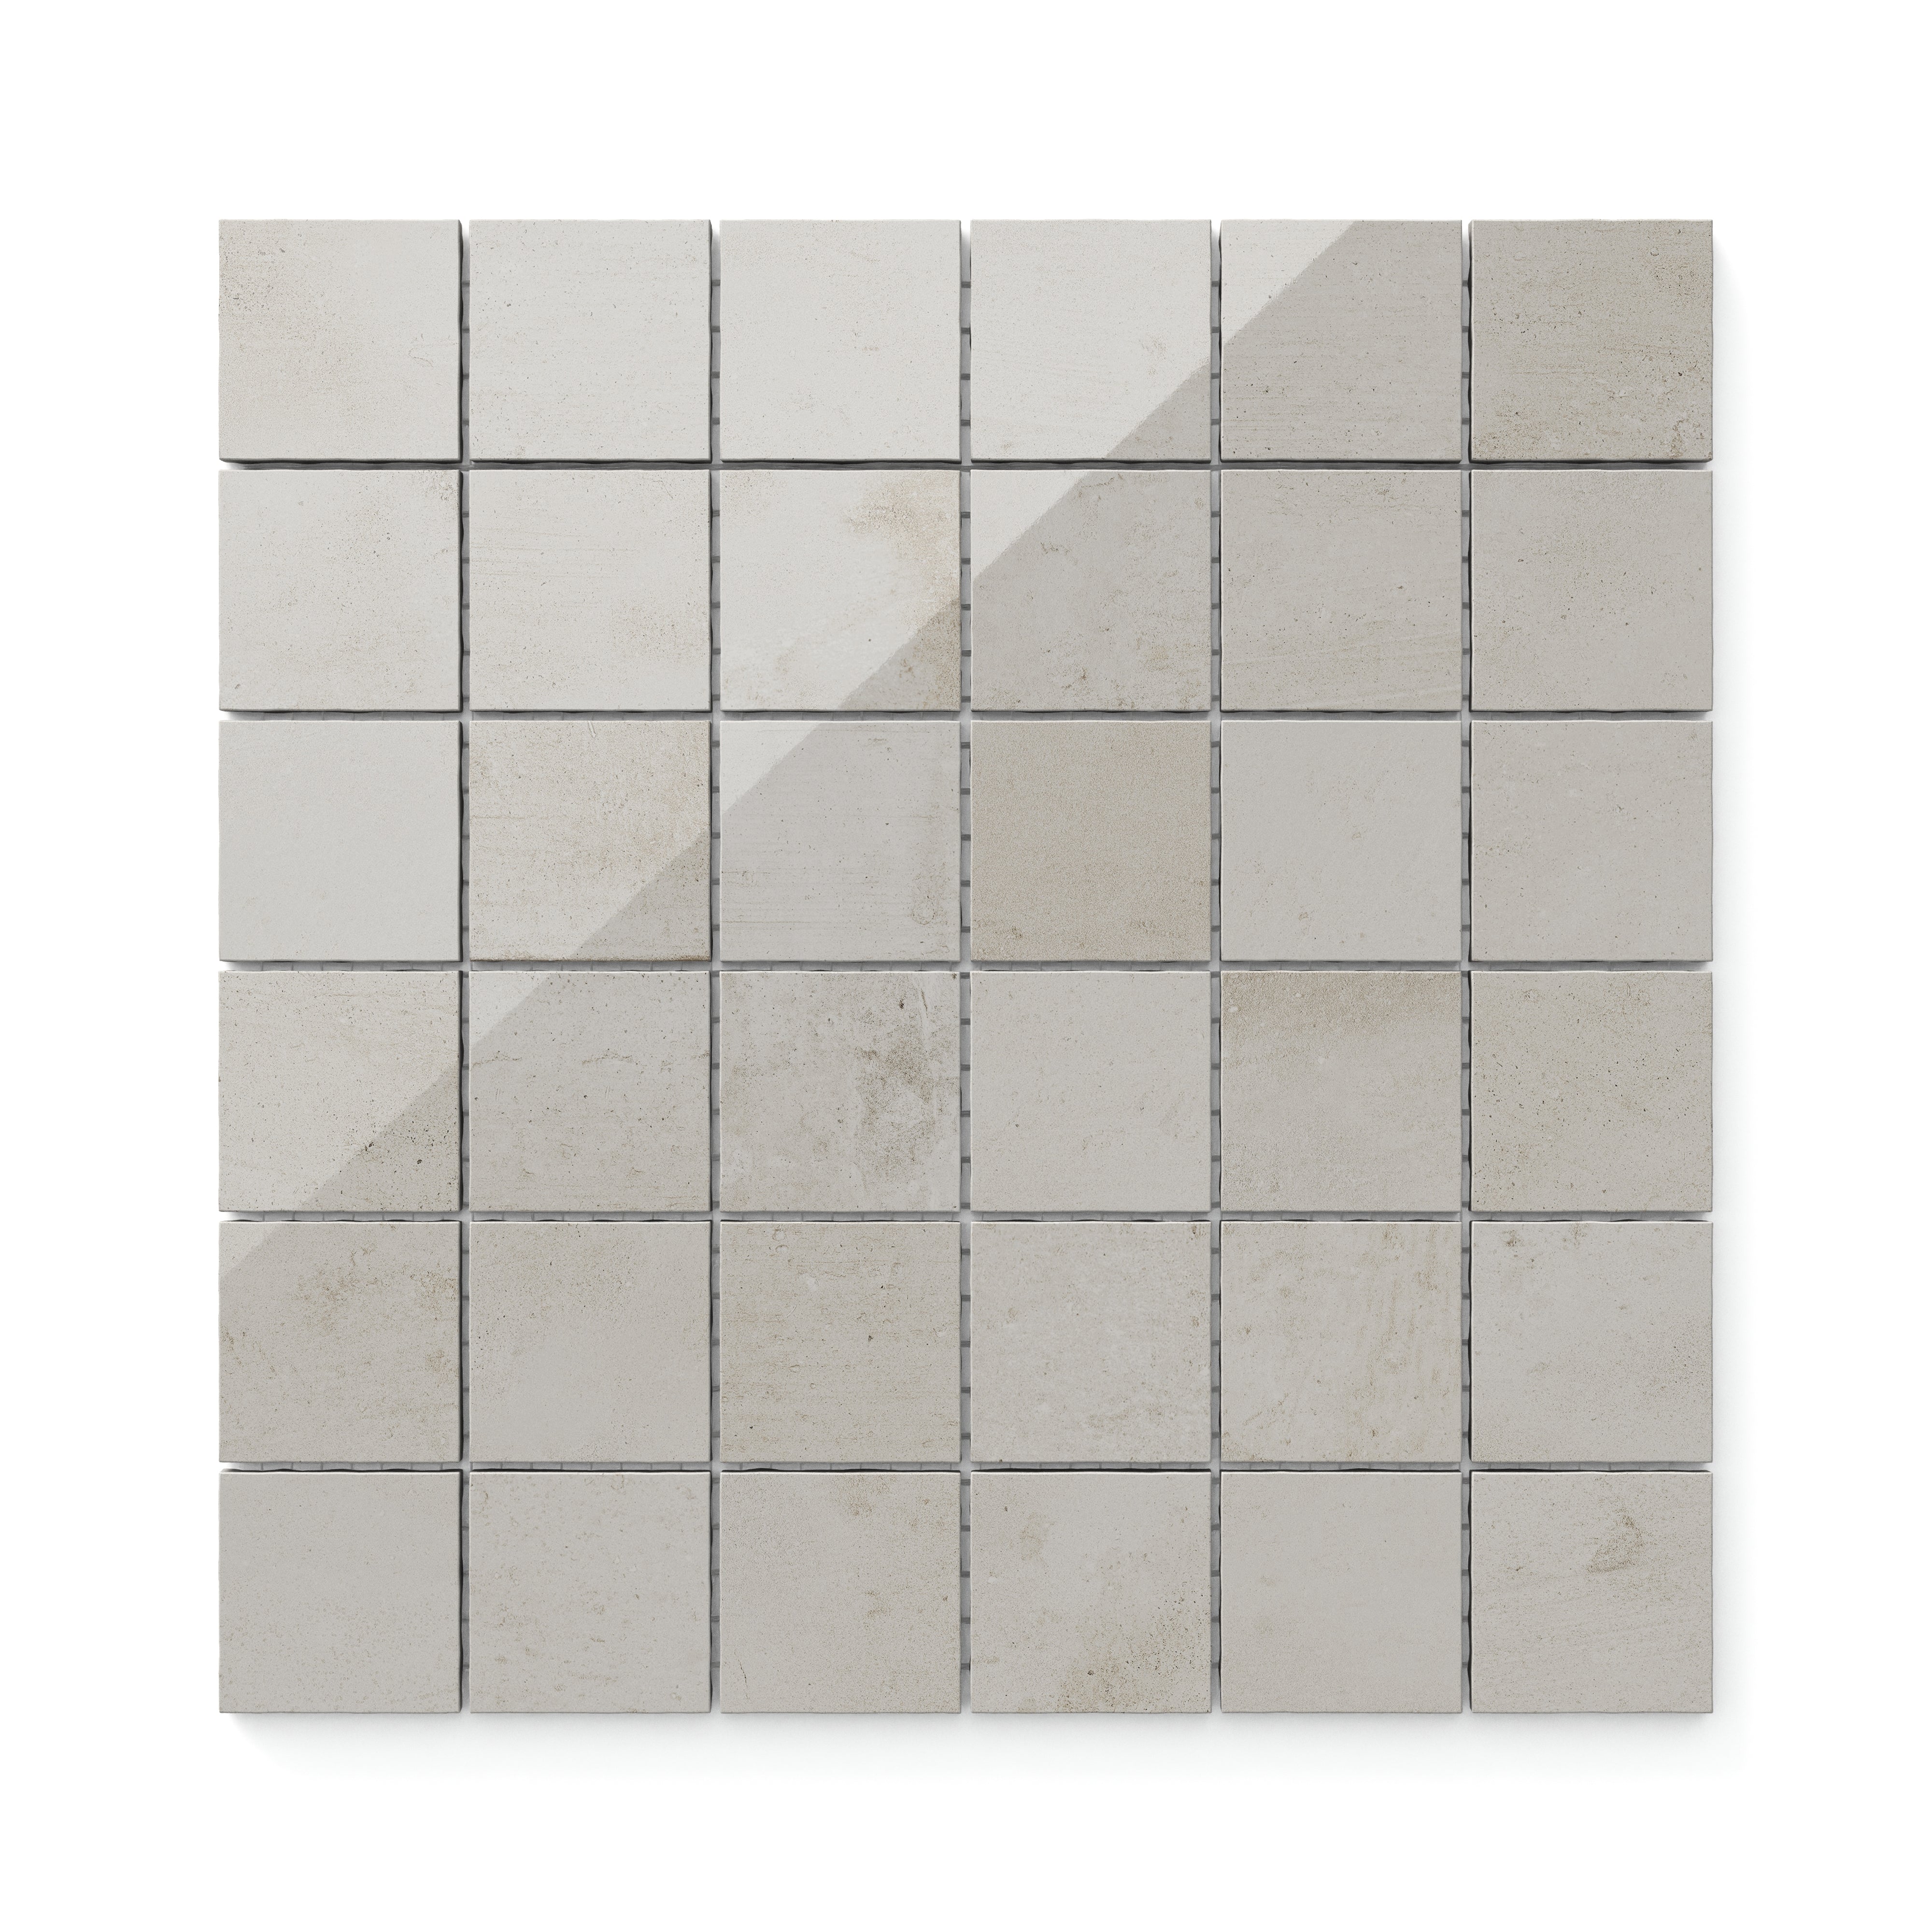 Ramsey 2x2 Polished Porcelain Mosaic Tile in Chalk